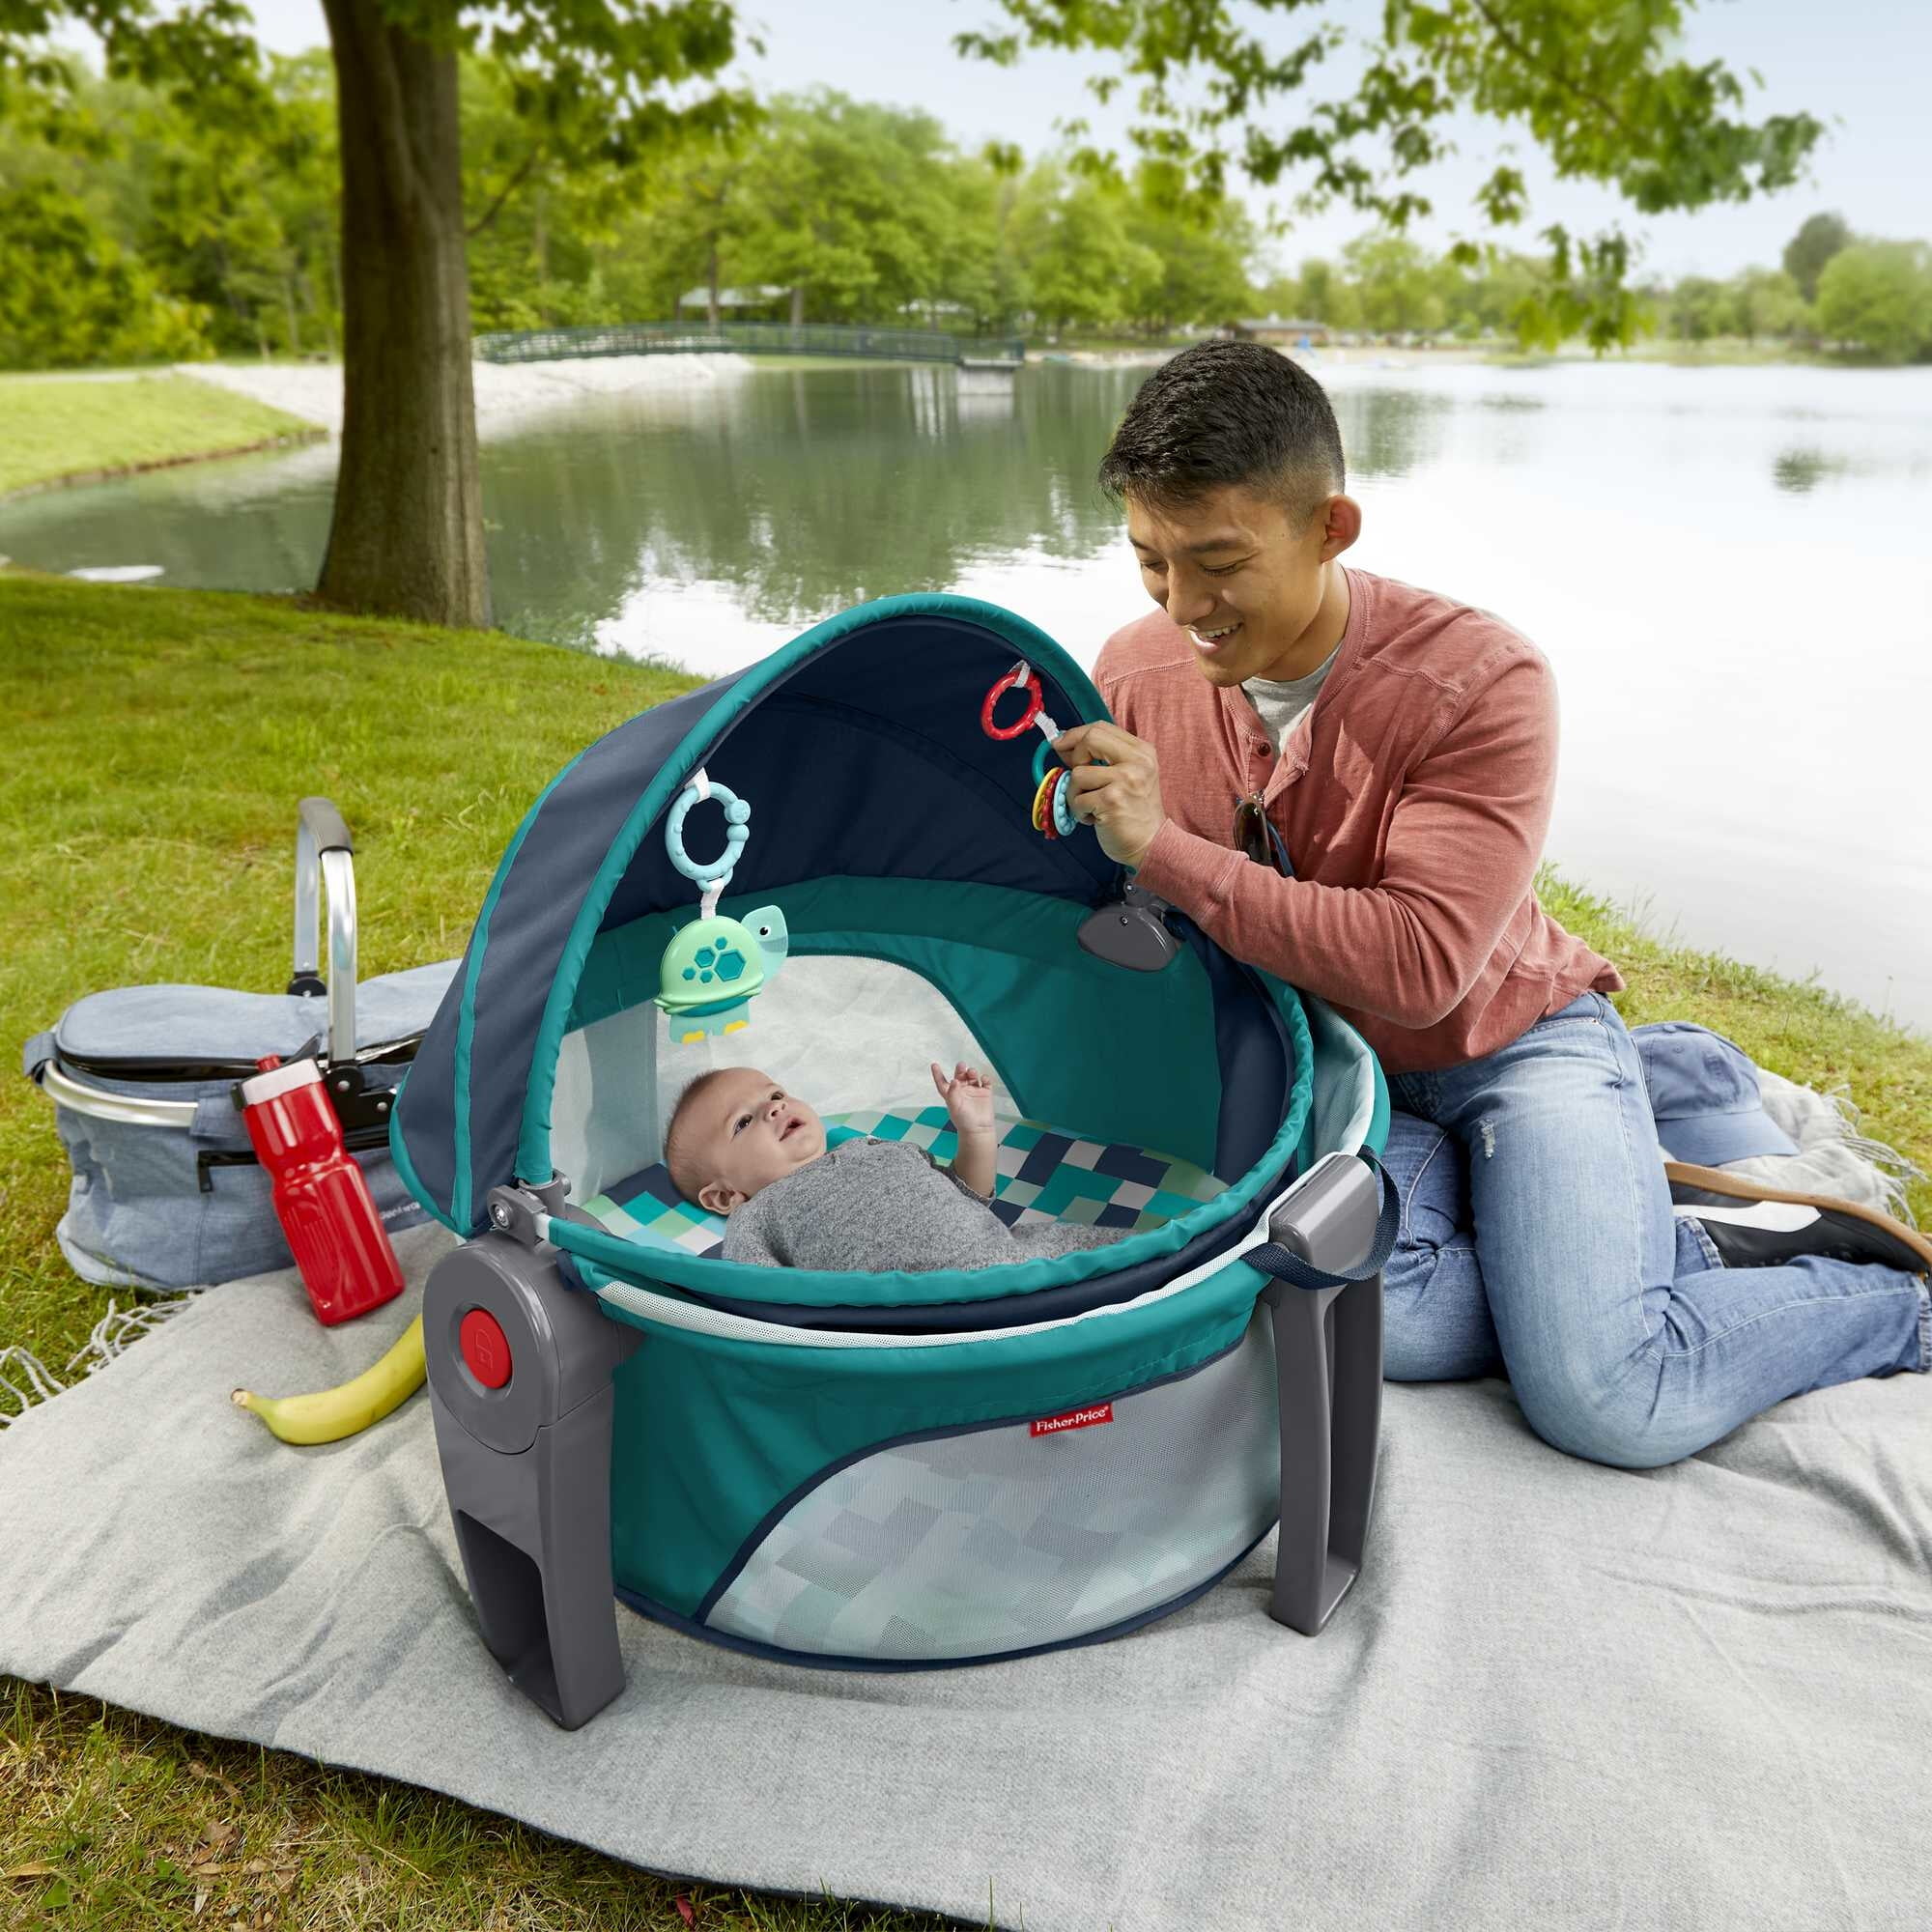 Fisher-Price On-the-Go Baby Dome Portable Bassinet and Play Space